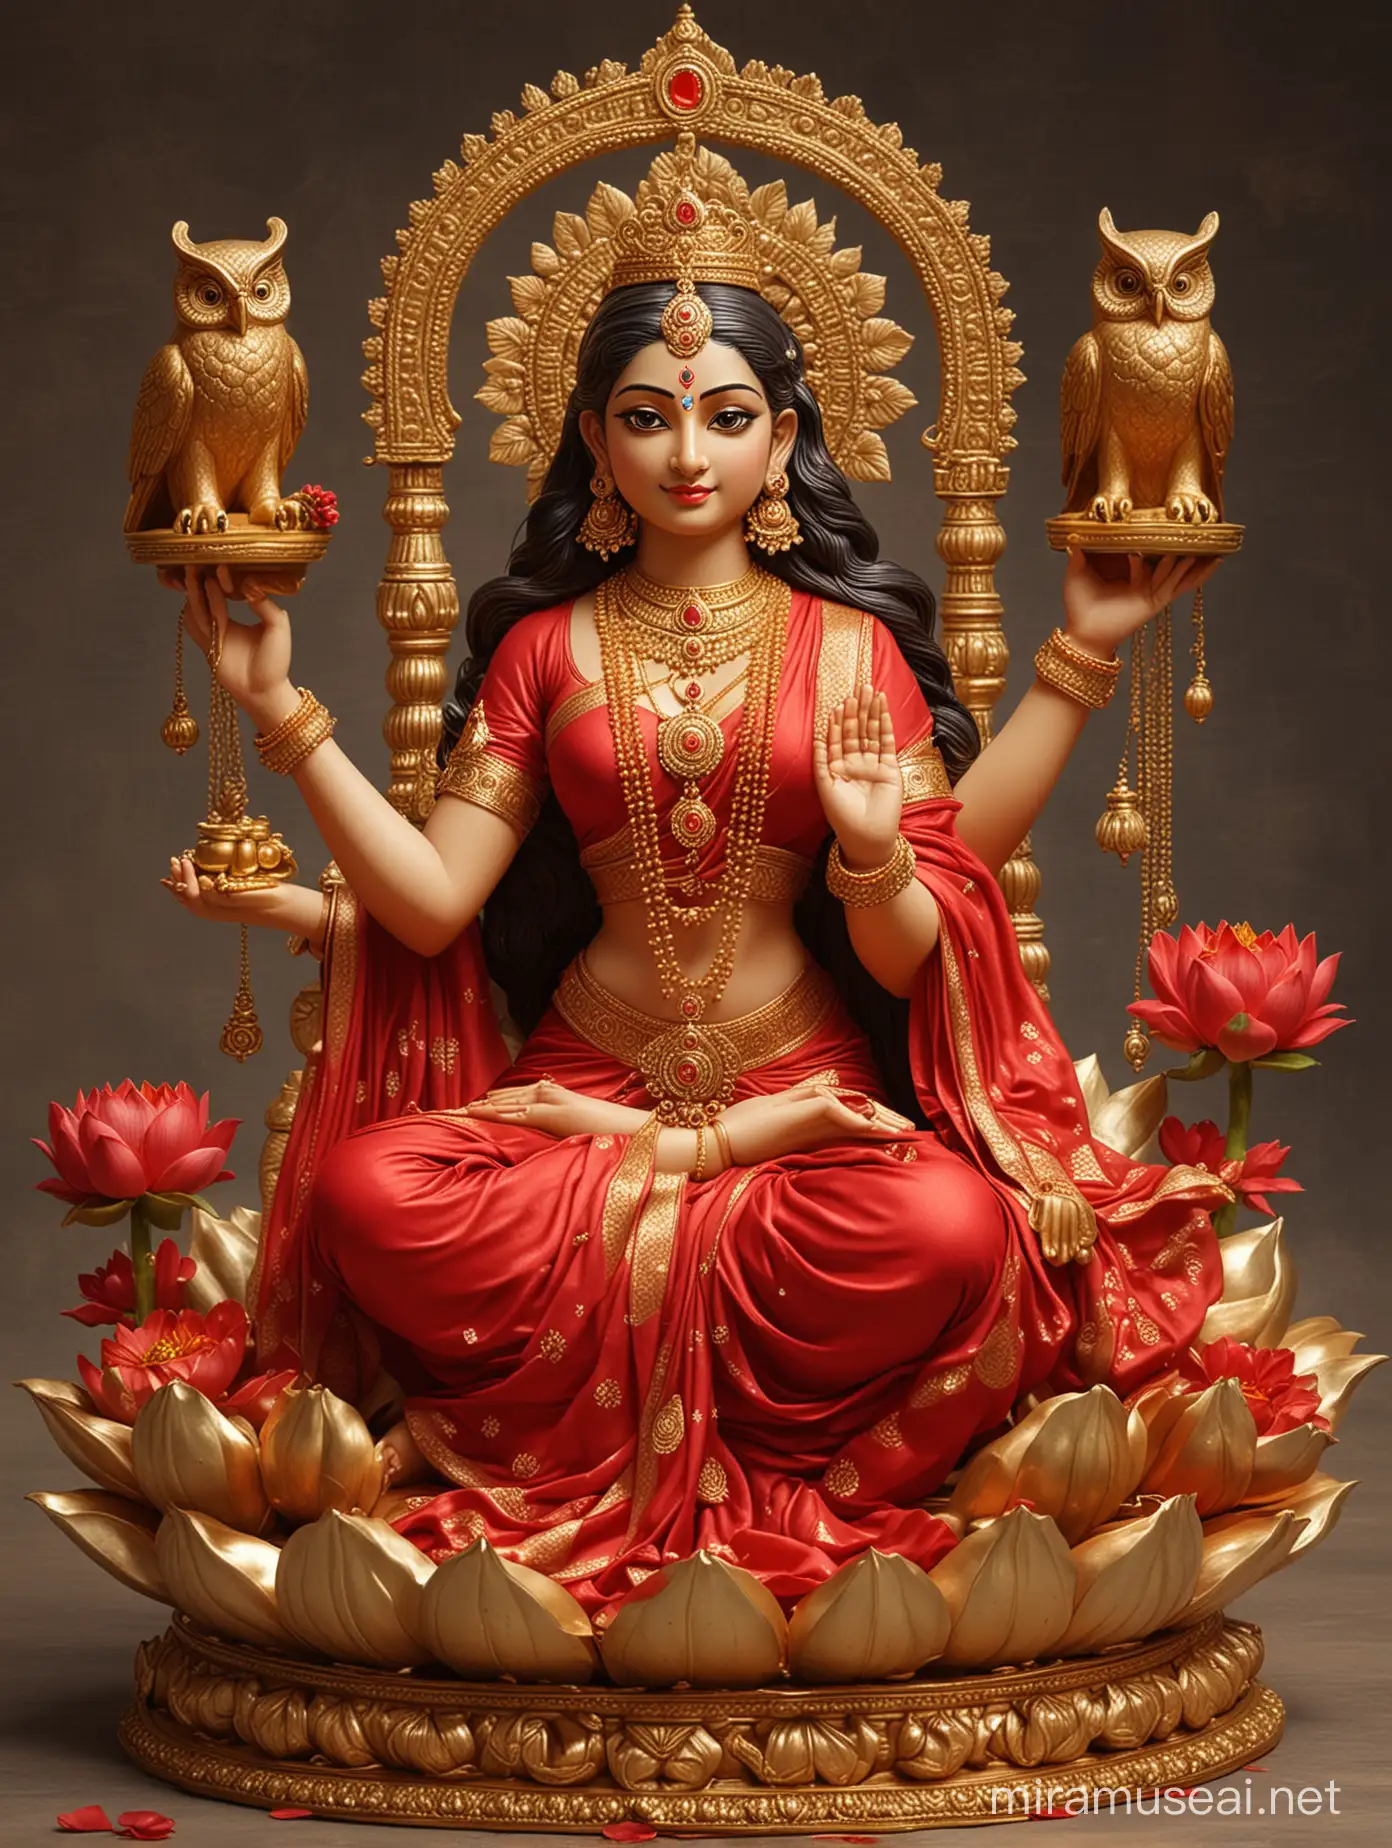 Goddess laxmi sitting on divine lotus flower, wearing Royal red saree, gold ornaments, gold coins pot, owl in side, four blessing arms, wealthy, divine, realistic, blessings,